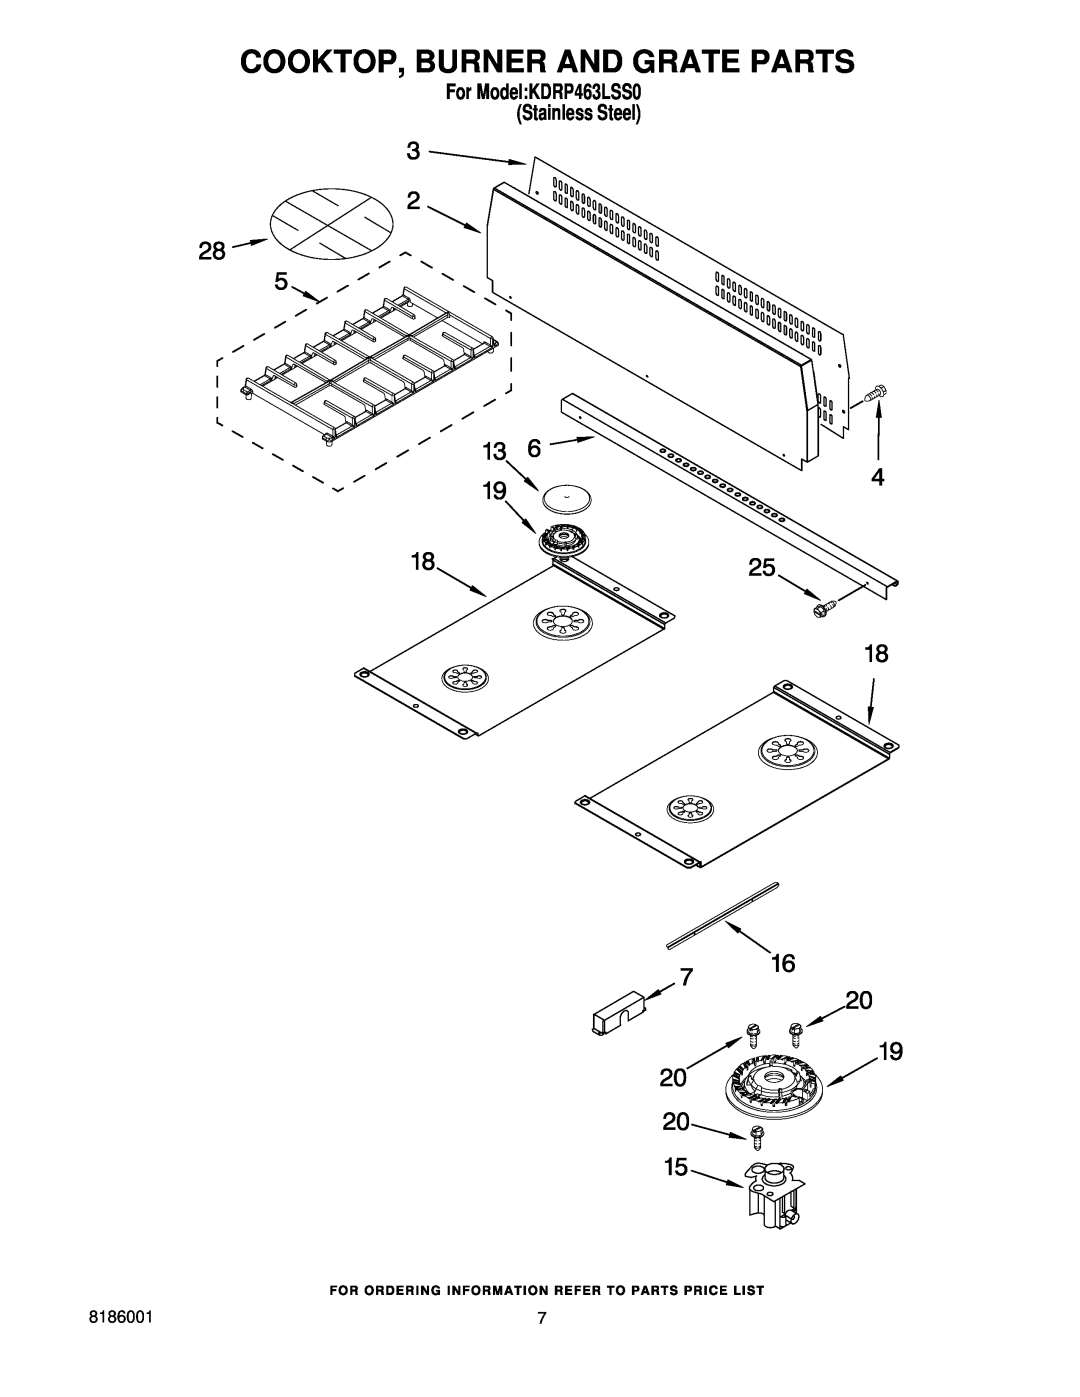 KitchenAid manual Cooktop, Burner And Grate Parts, For ModelKDRP463LSS0 Stainless Steel 